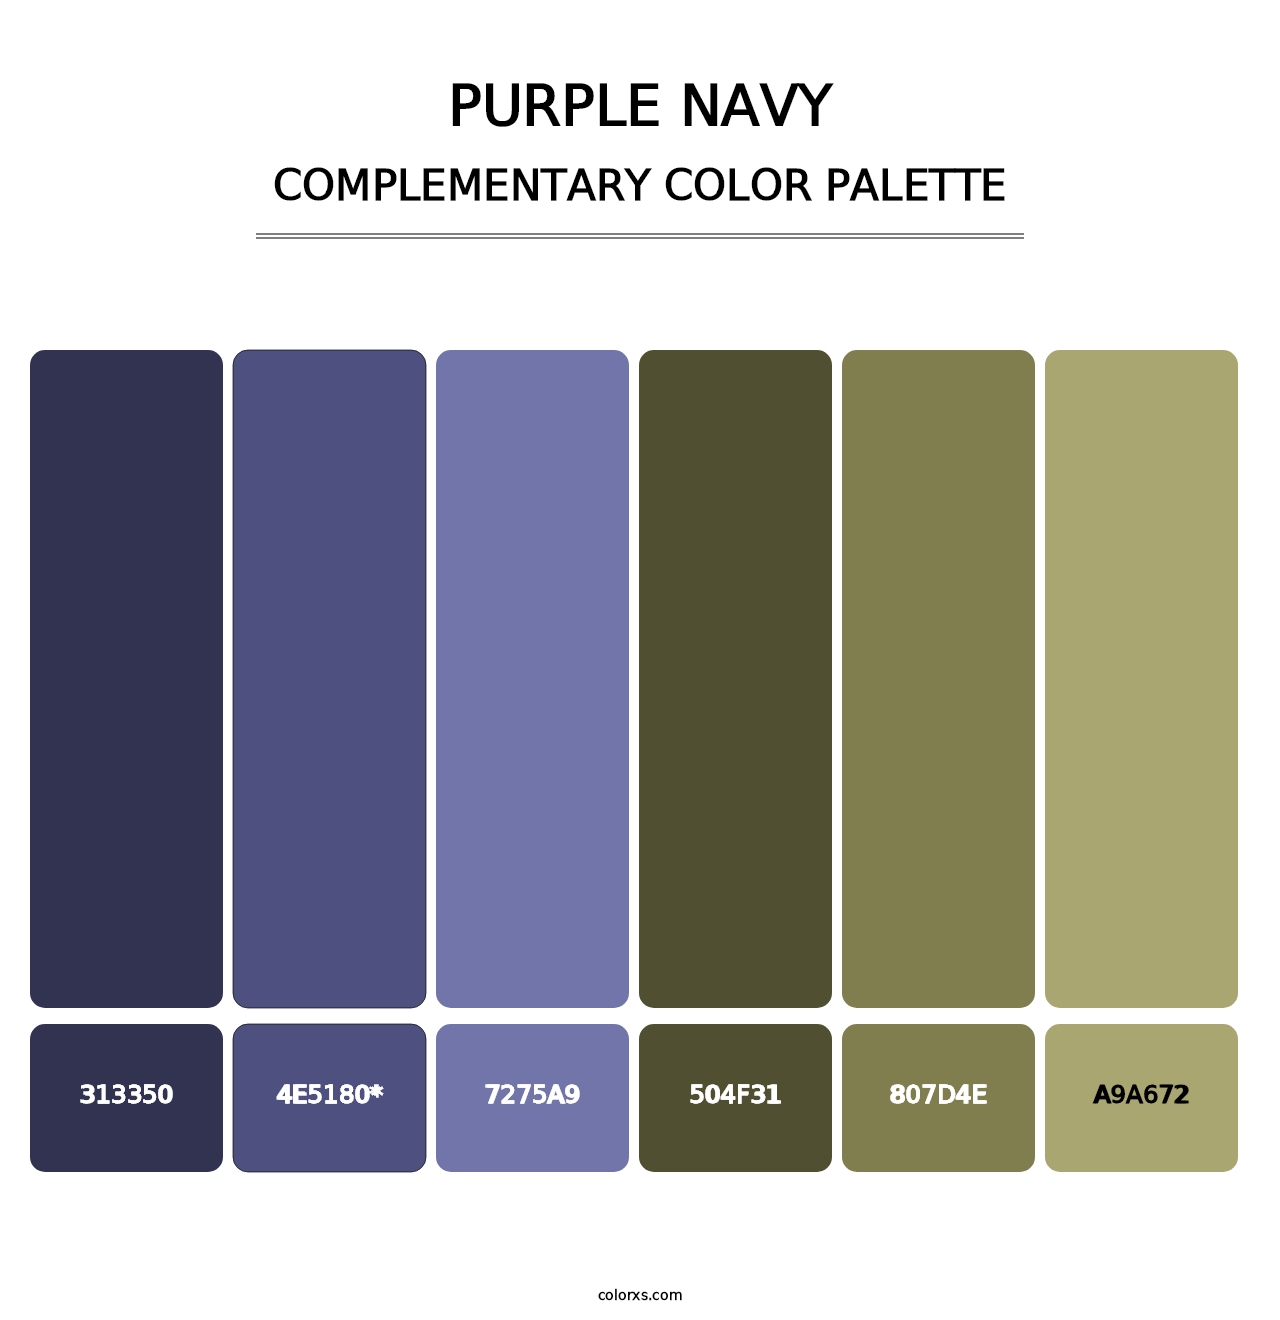 Purple Navy - Complementary Color Palette